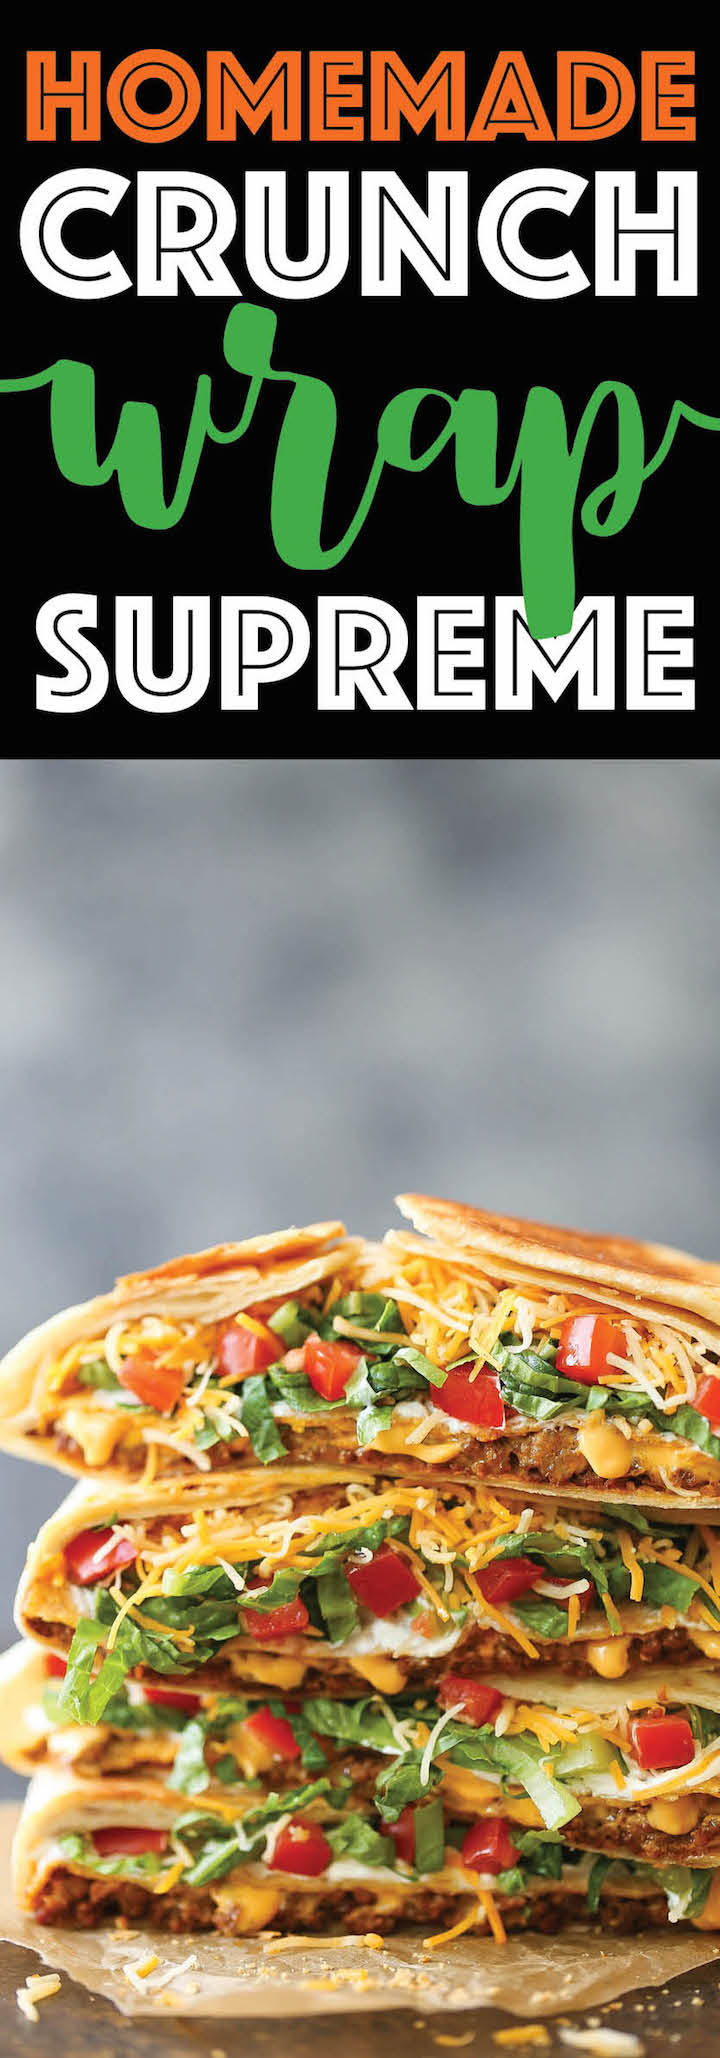 Homemade Crunch Wrap Supreme - A complete copycat version from Taco Bell! Except completely homemade and made so much more healthier! Get your fix now!